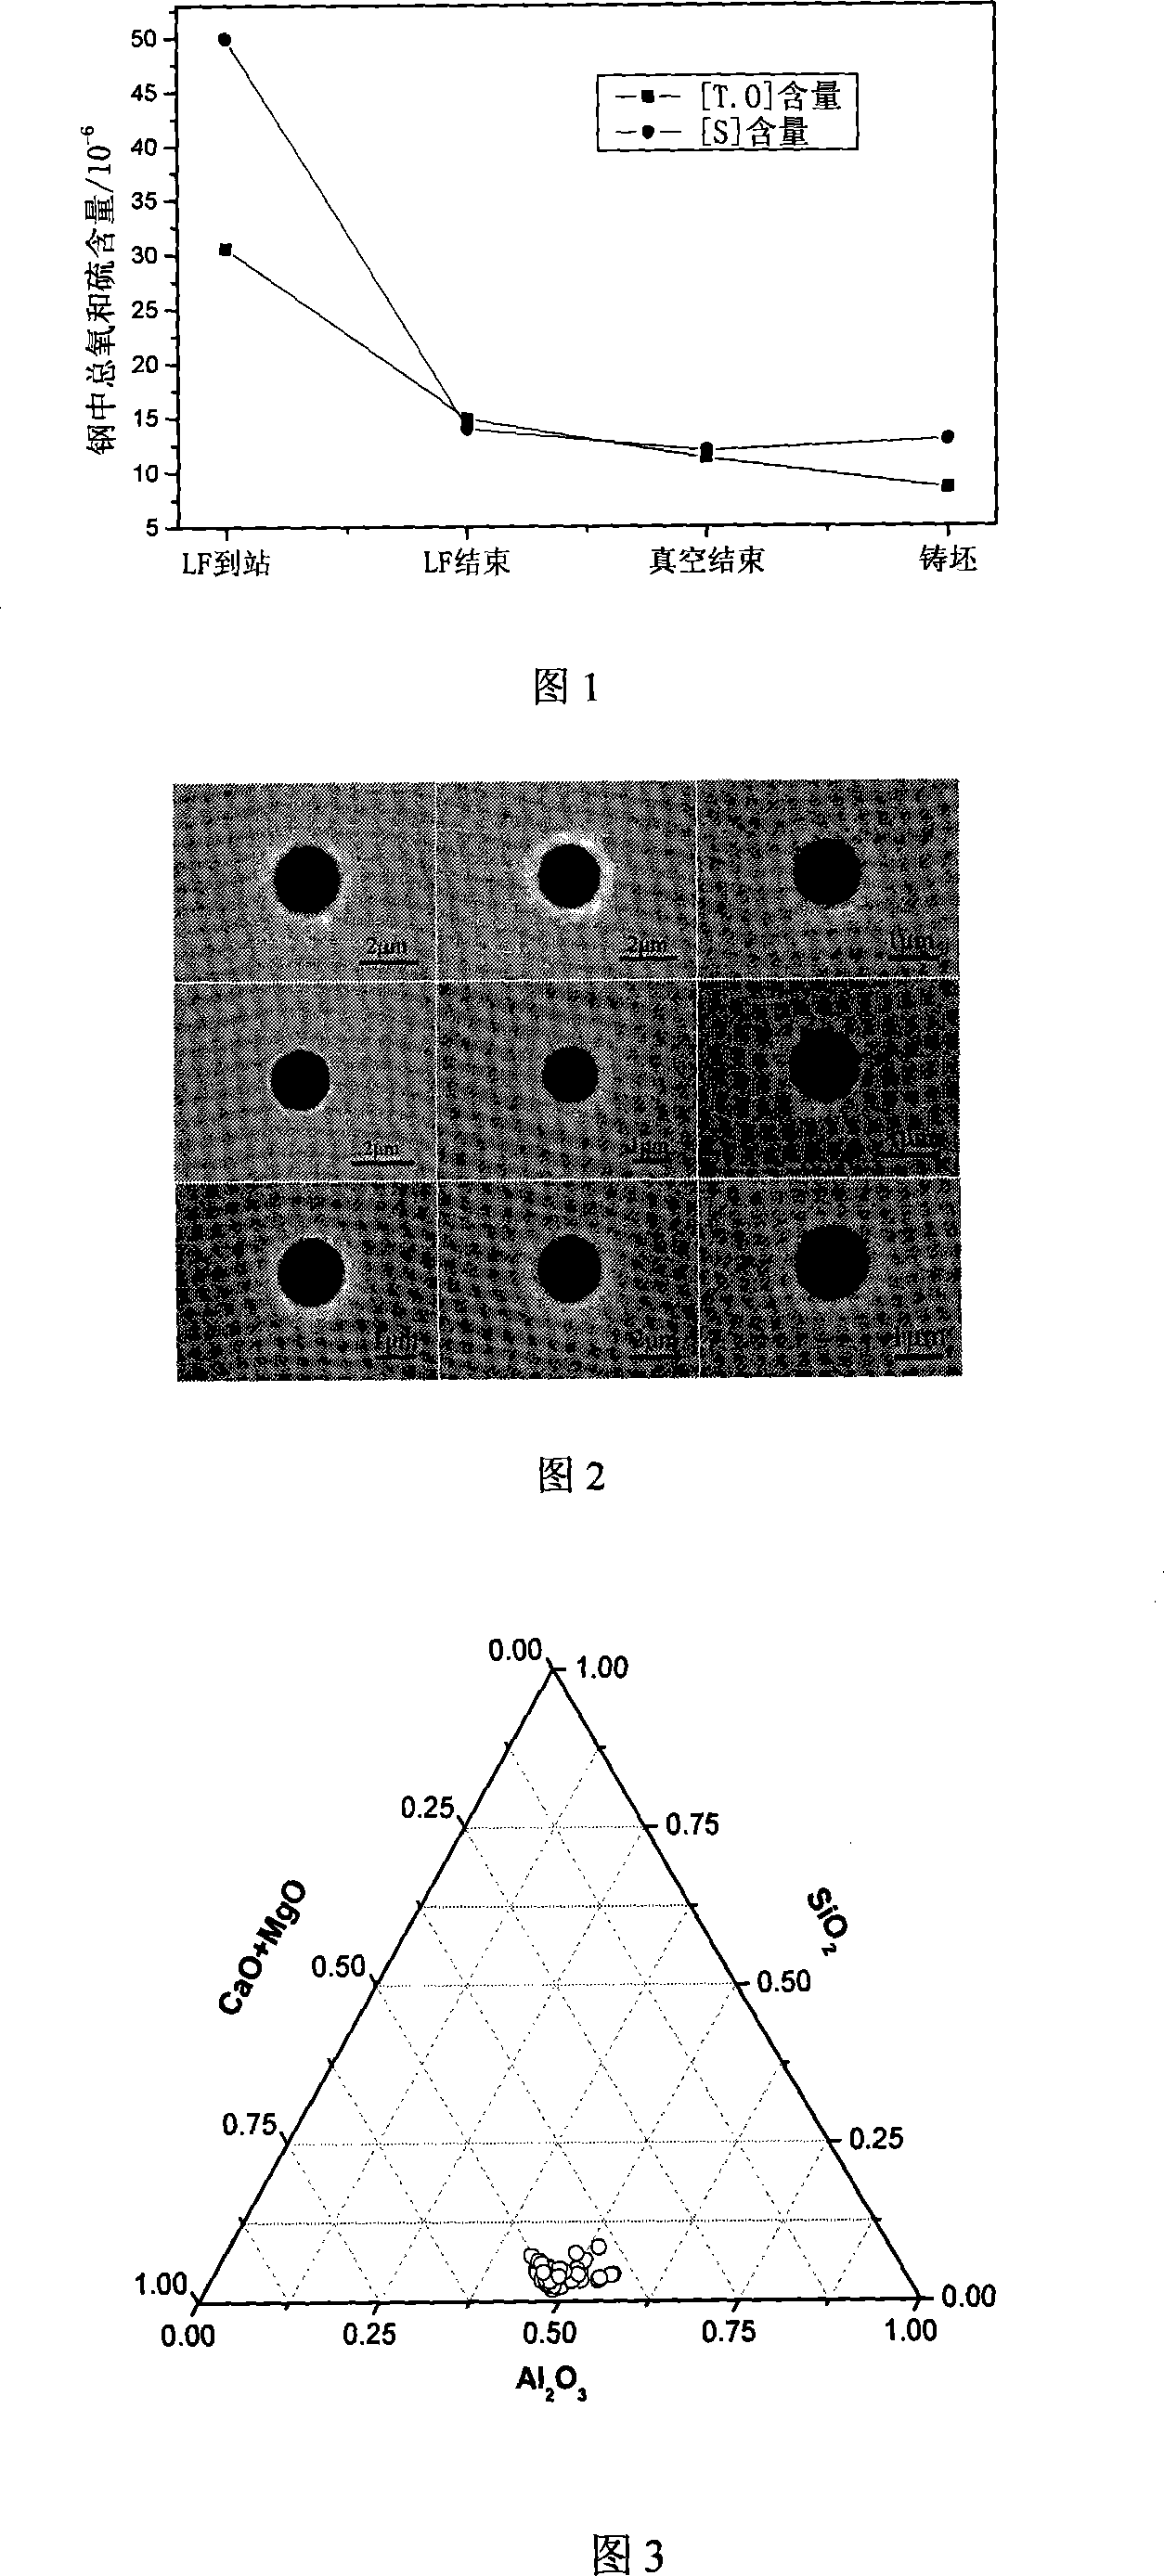 Process of deoxygenating, desulfurizing and controlling non-metal inclusion content in steel